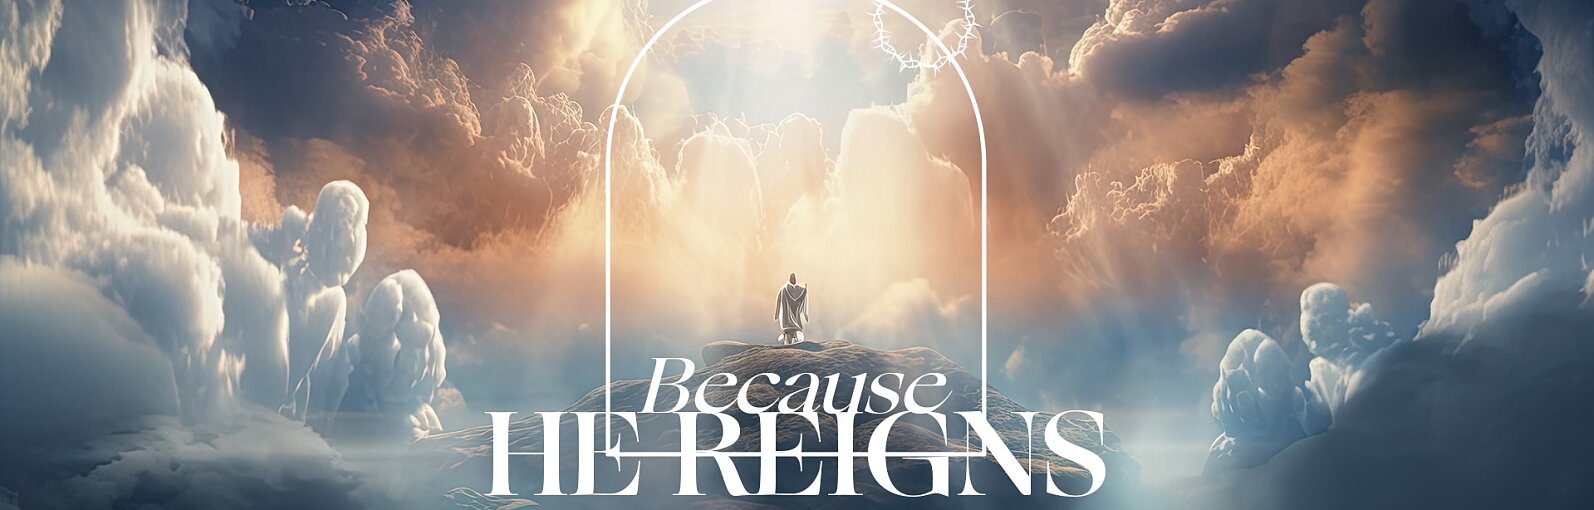 /images/r/because-he-reigns-sermon-series/c1594x510g0-307-1920-921/because-he-reigns-sermon-series.jpg